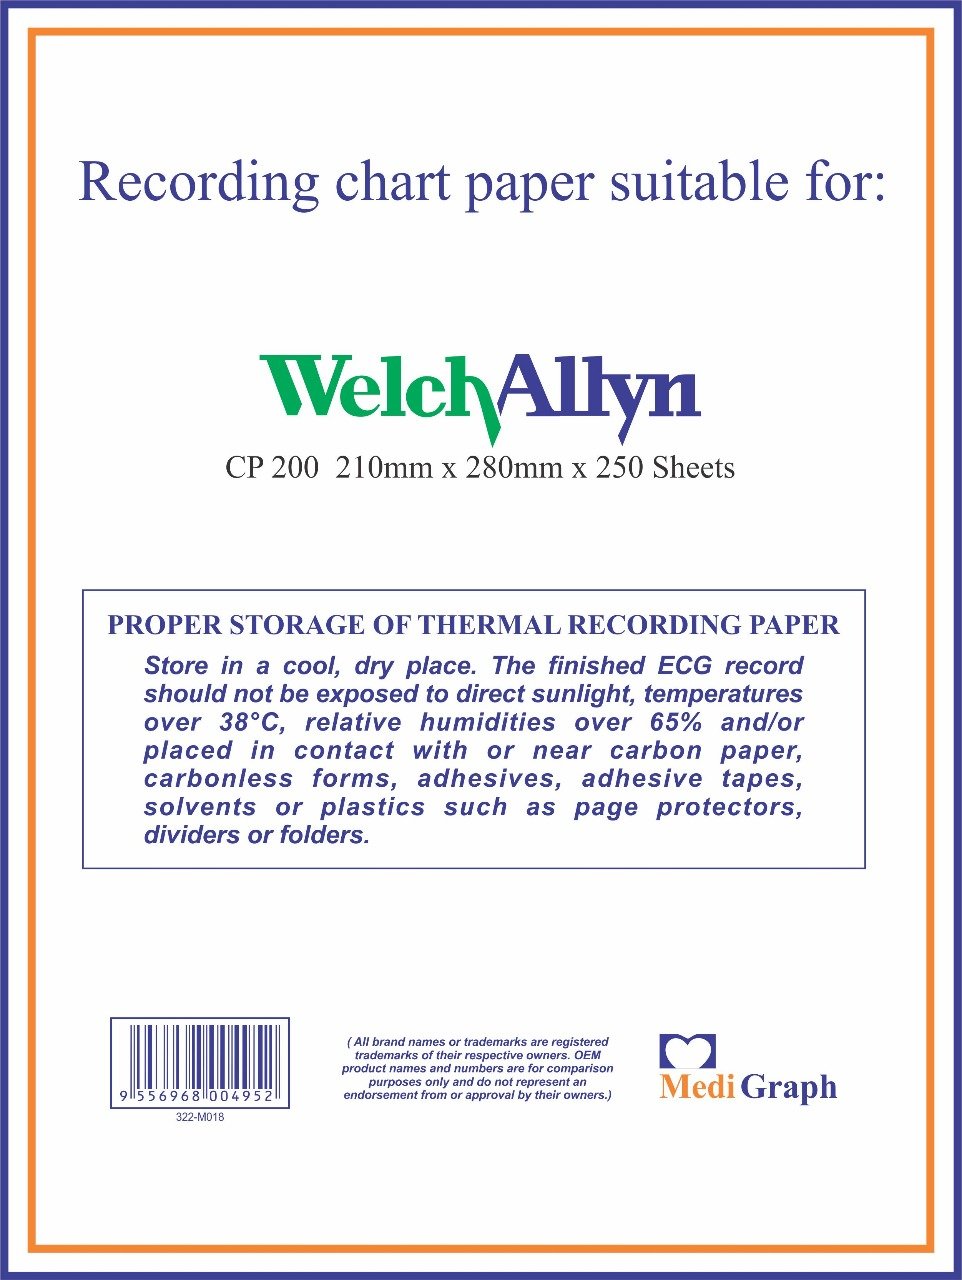 ECG Paper Welch Allyn CP 200 Price in Pakistan